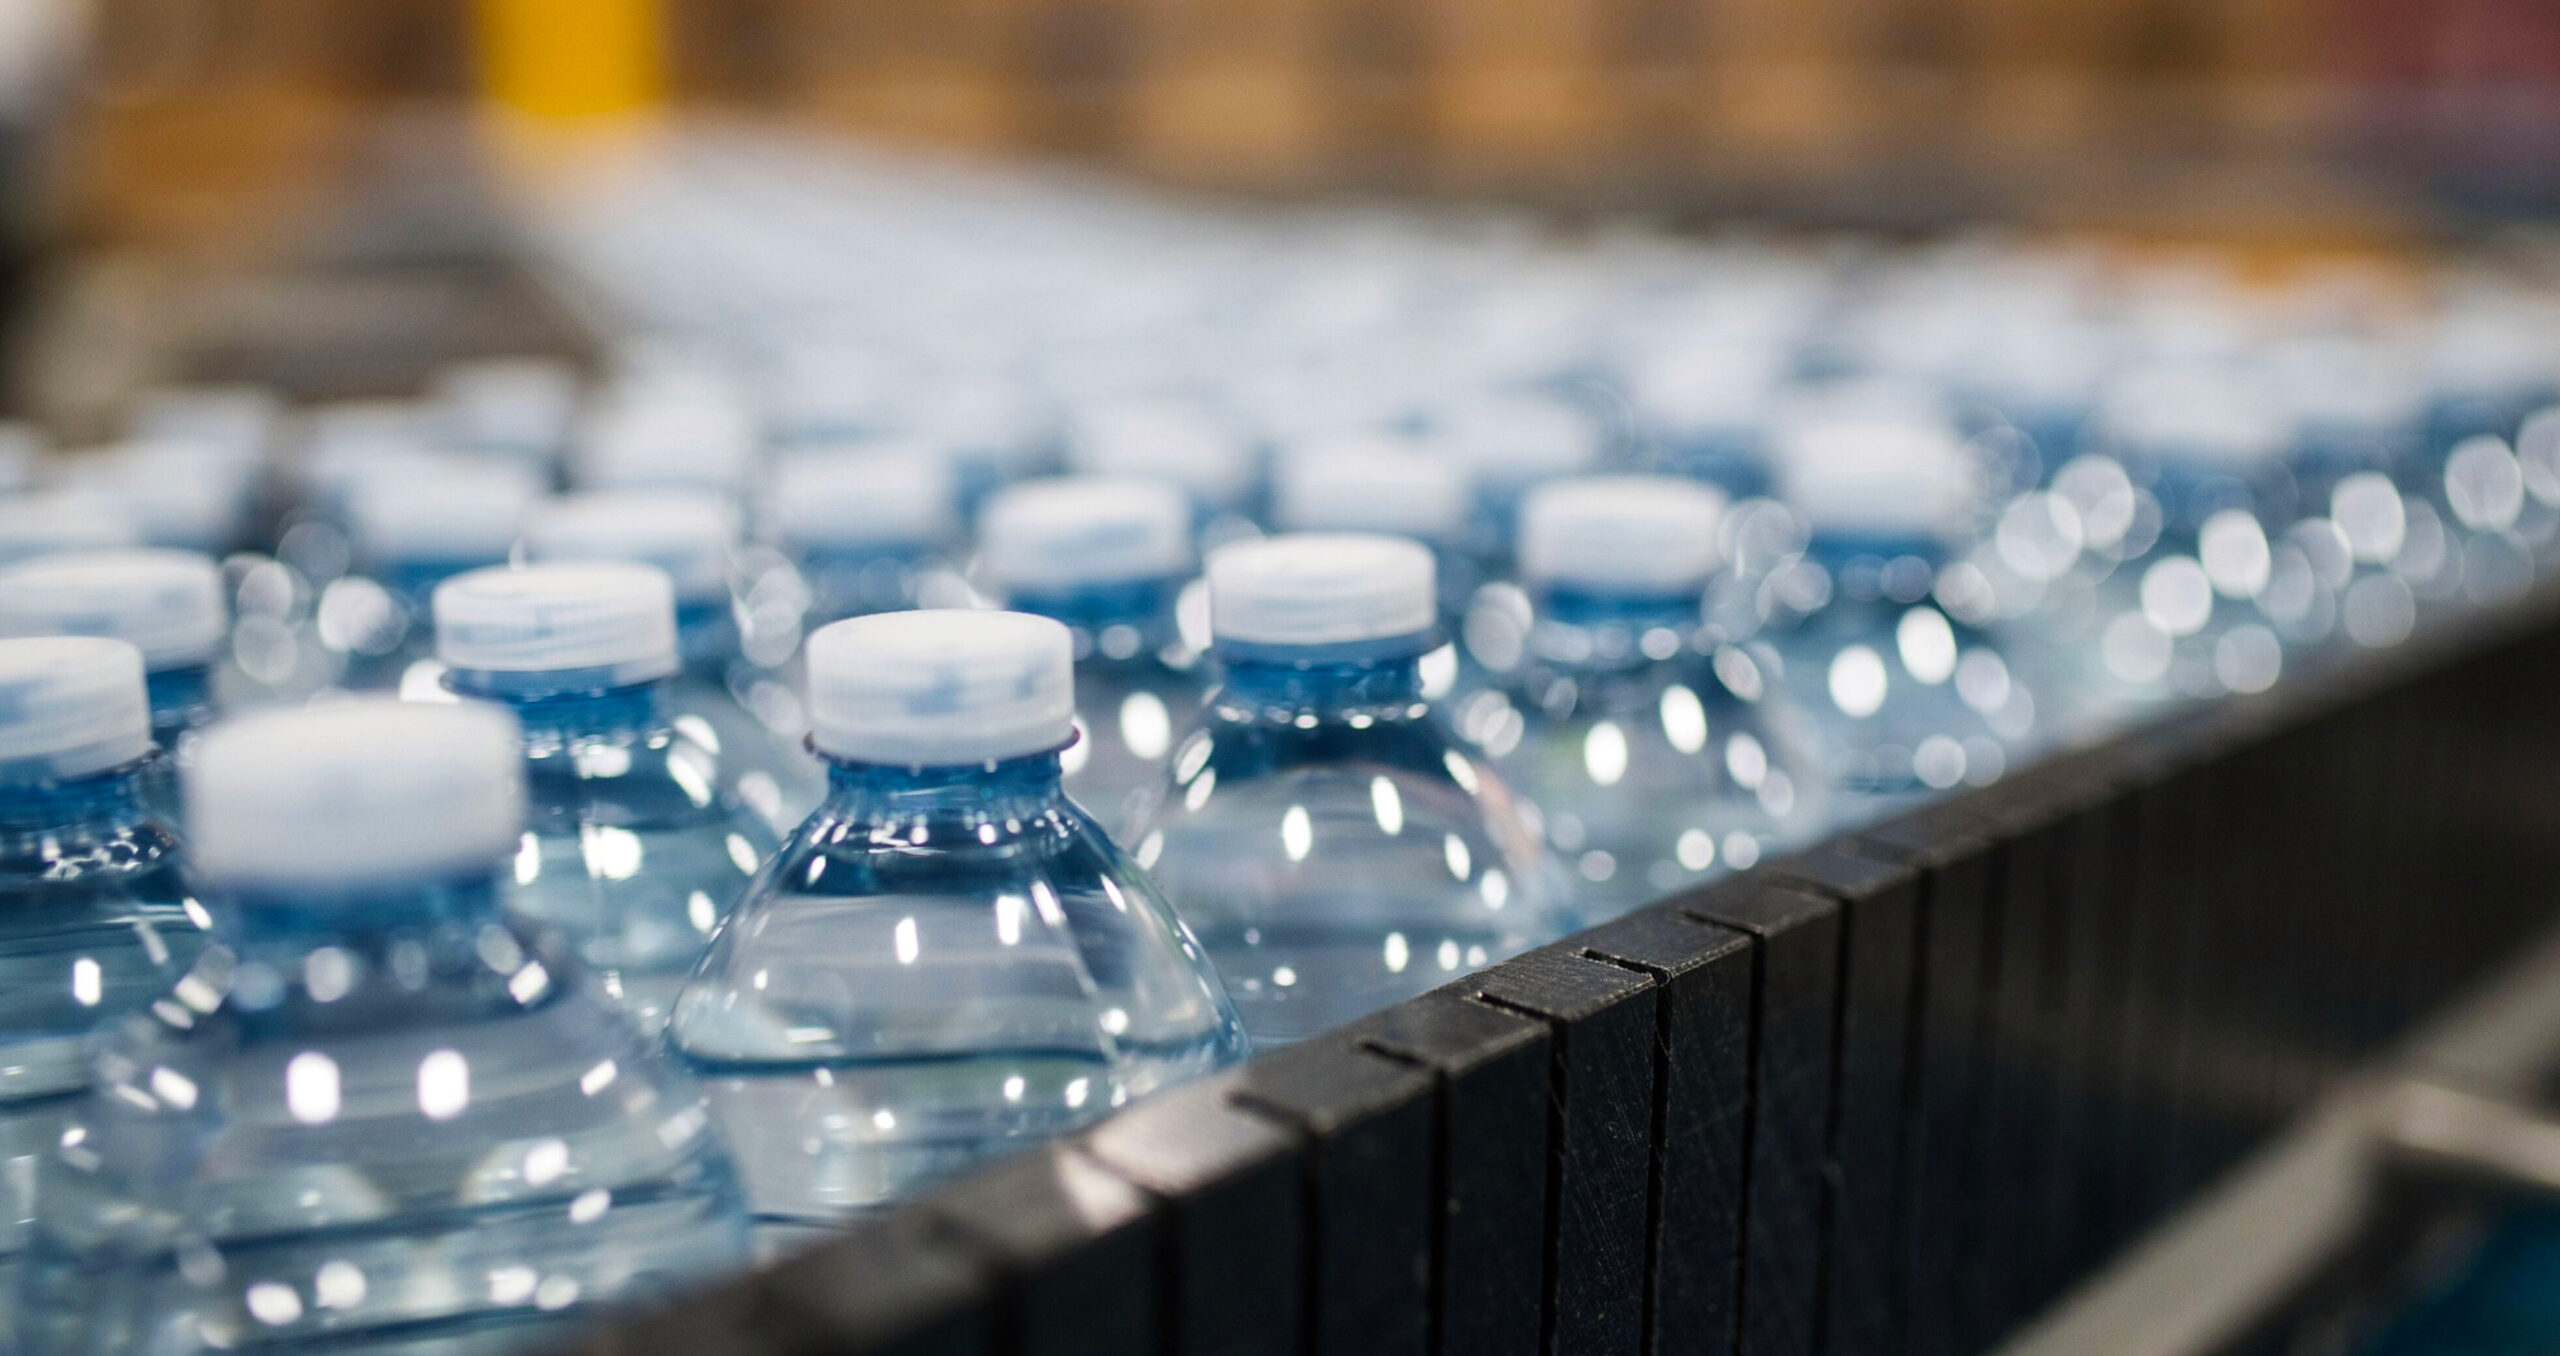 Plastic bottles of water. The report says none of companies has published a clear trajectory to transition away from single-use plastics, as most of them are focusing on recycling strategies instead. (Photo: James MacDonald/Bloomberg) 